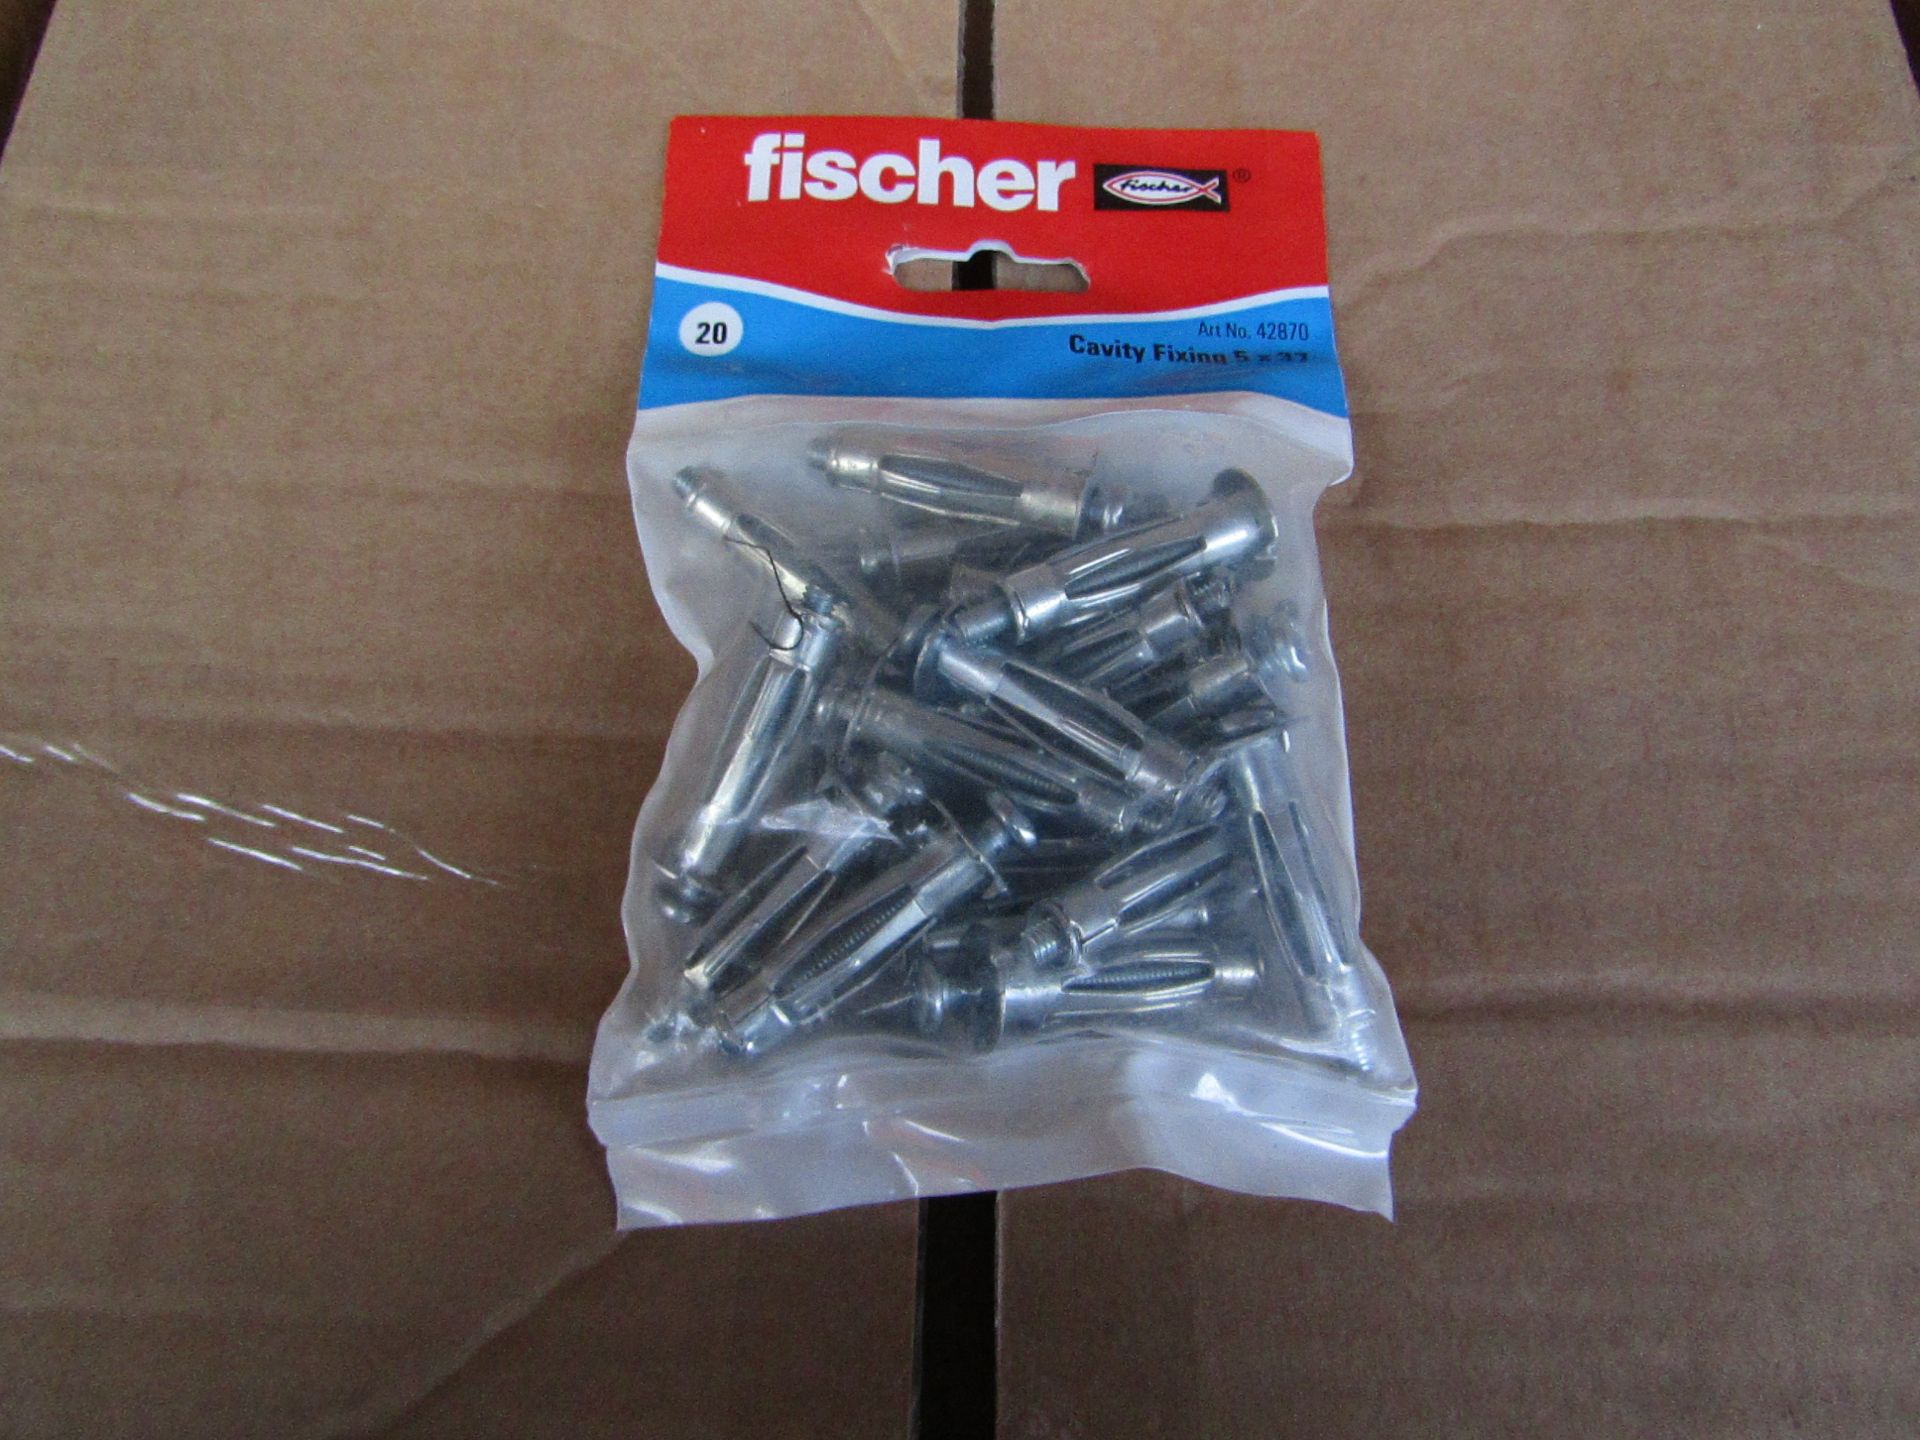 5x Fischer - Cavity Fixing 5 x 37 (Packs of 20) - New & Packaged.